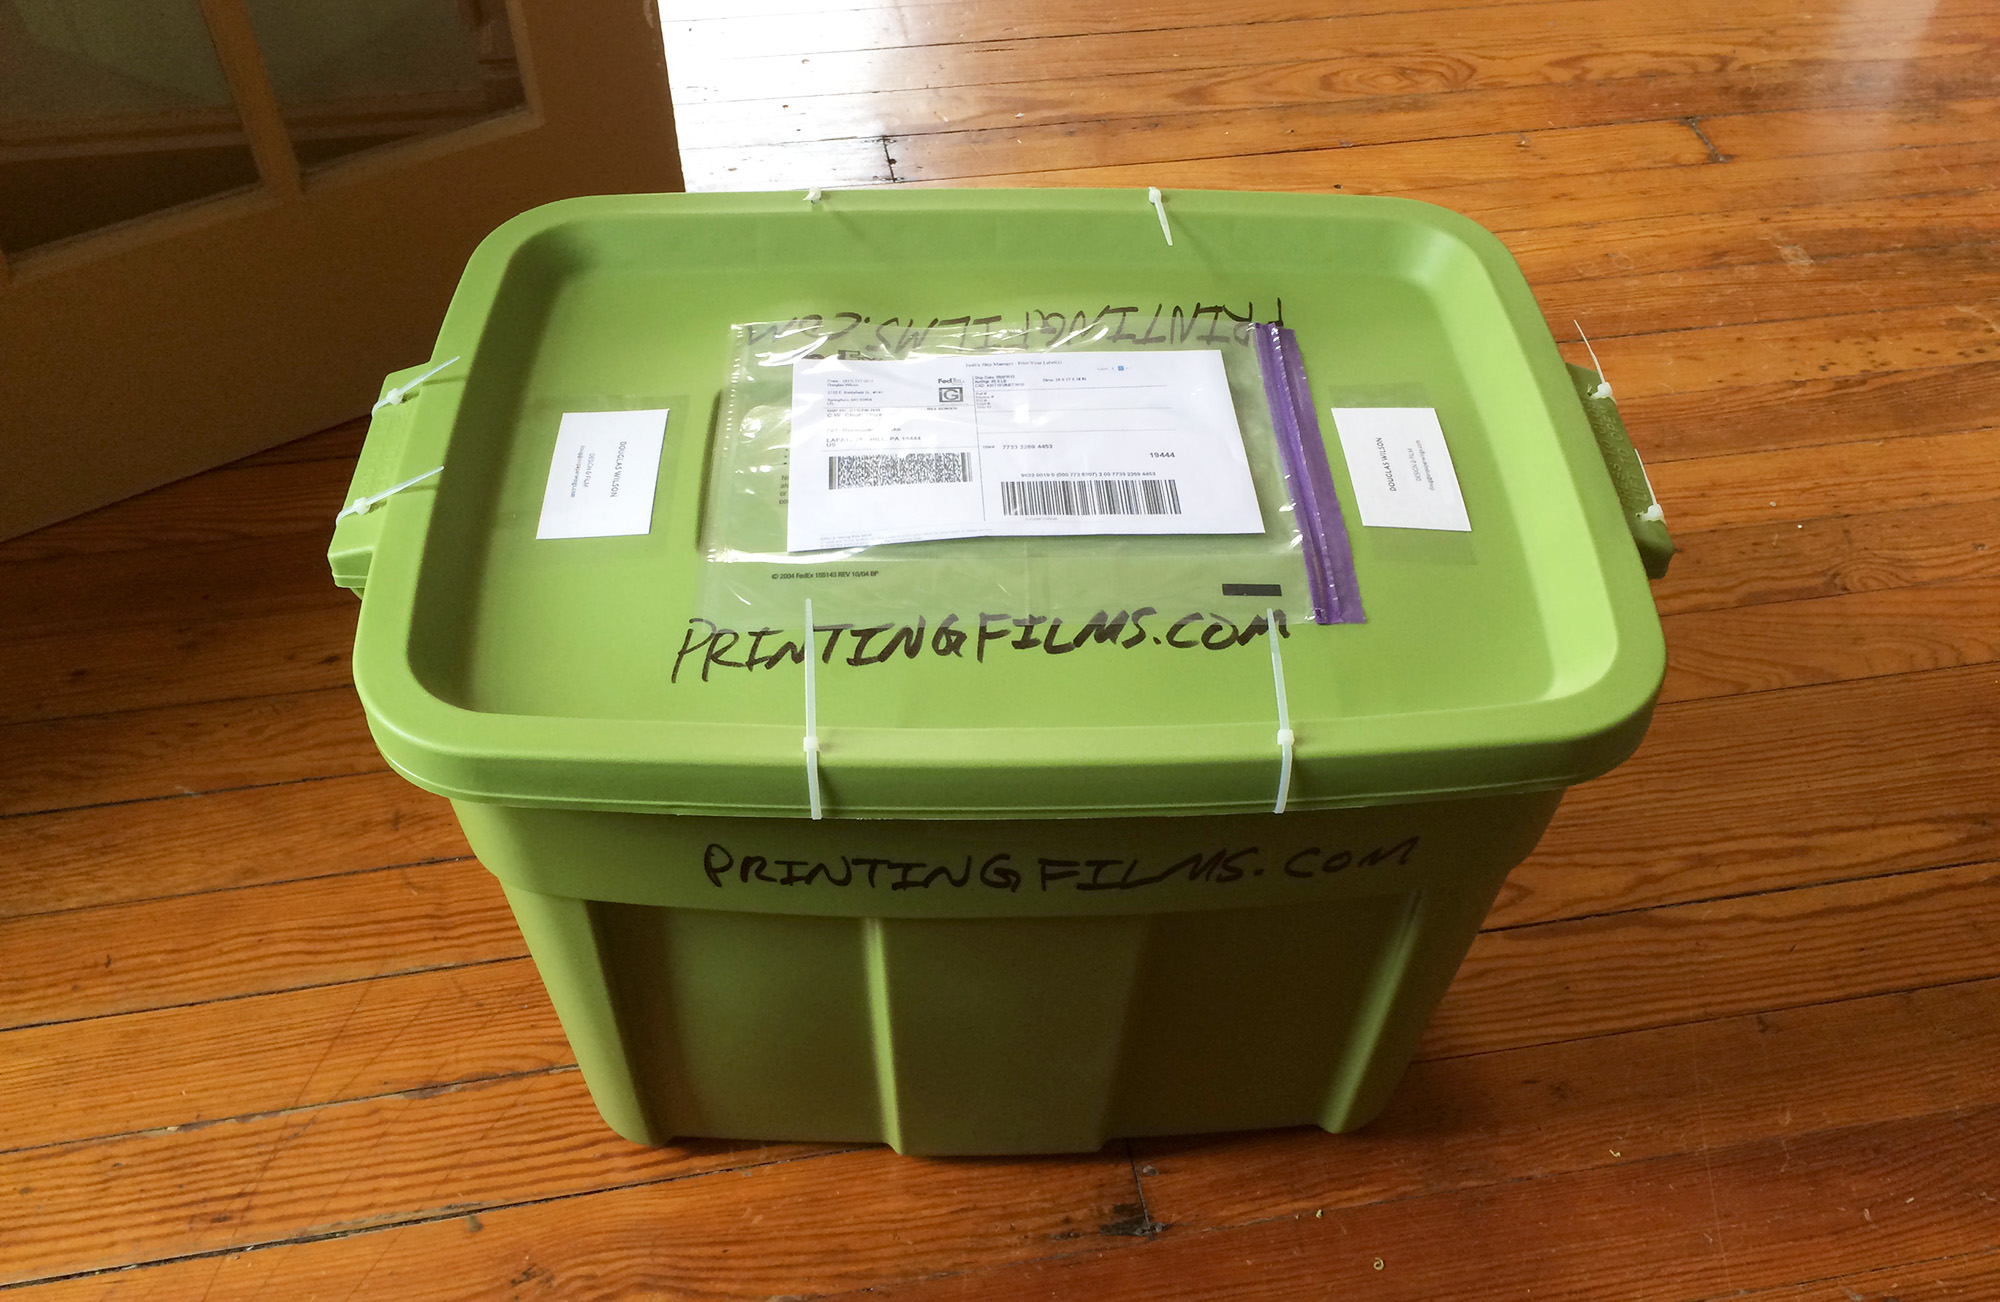 How do you ship off a dozen films to be digitized and make sure they survive FedEx? Buy a rubber container and use zip-ties: that’s how.